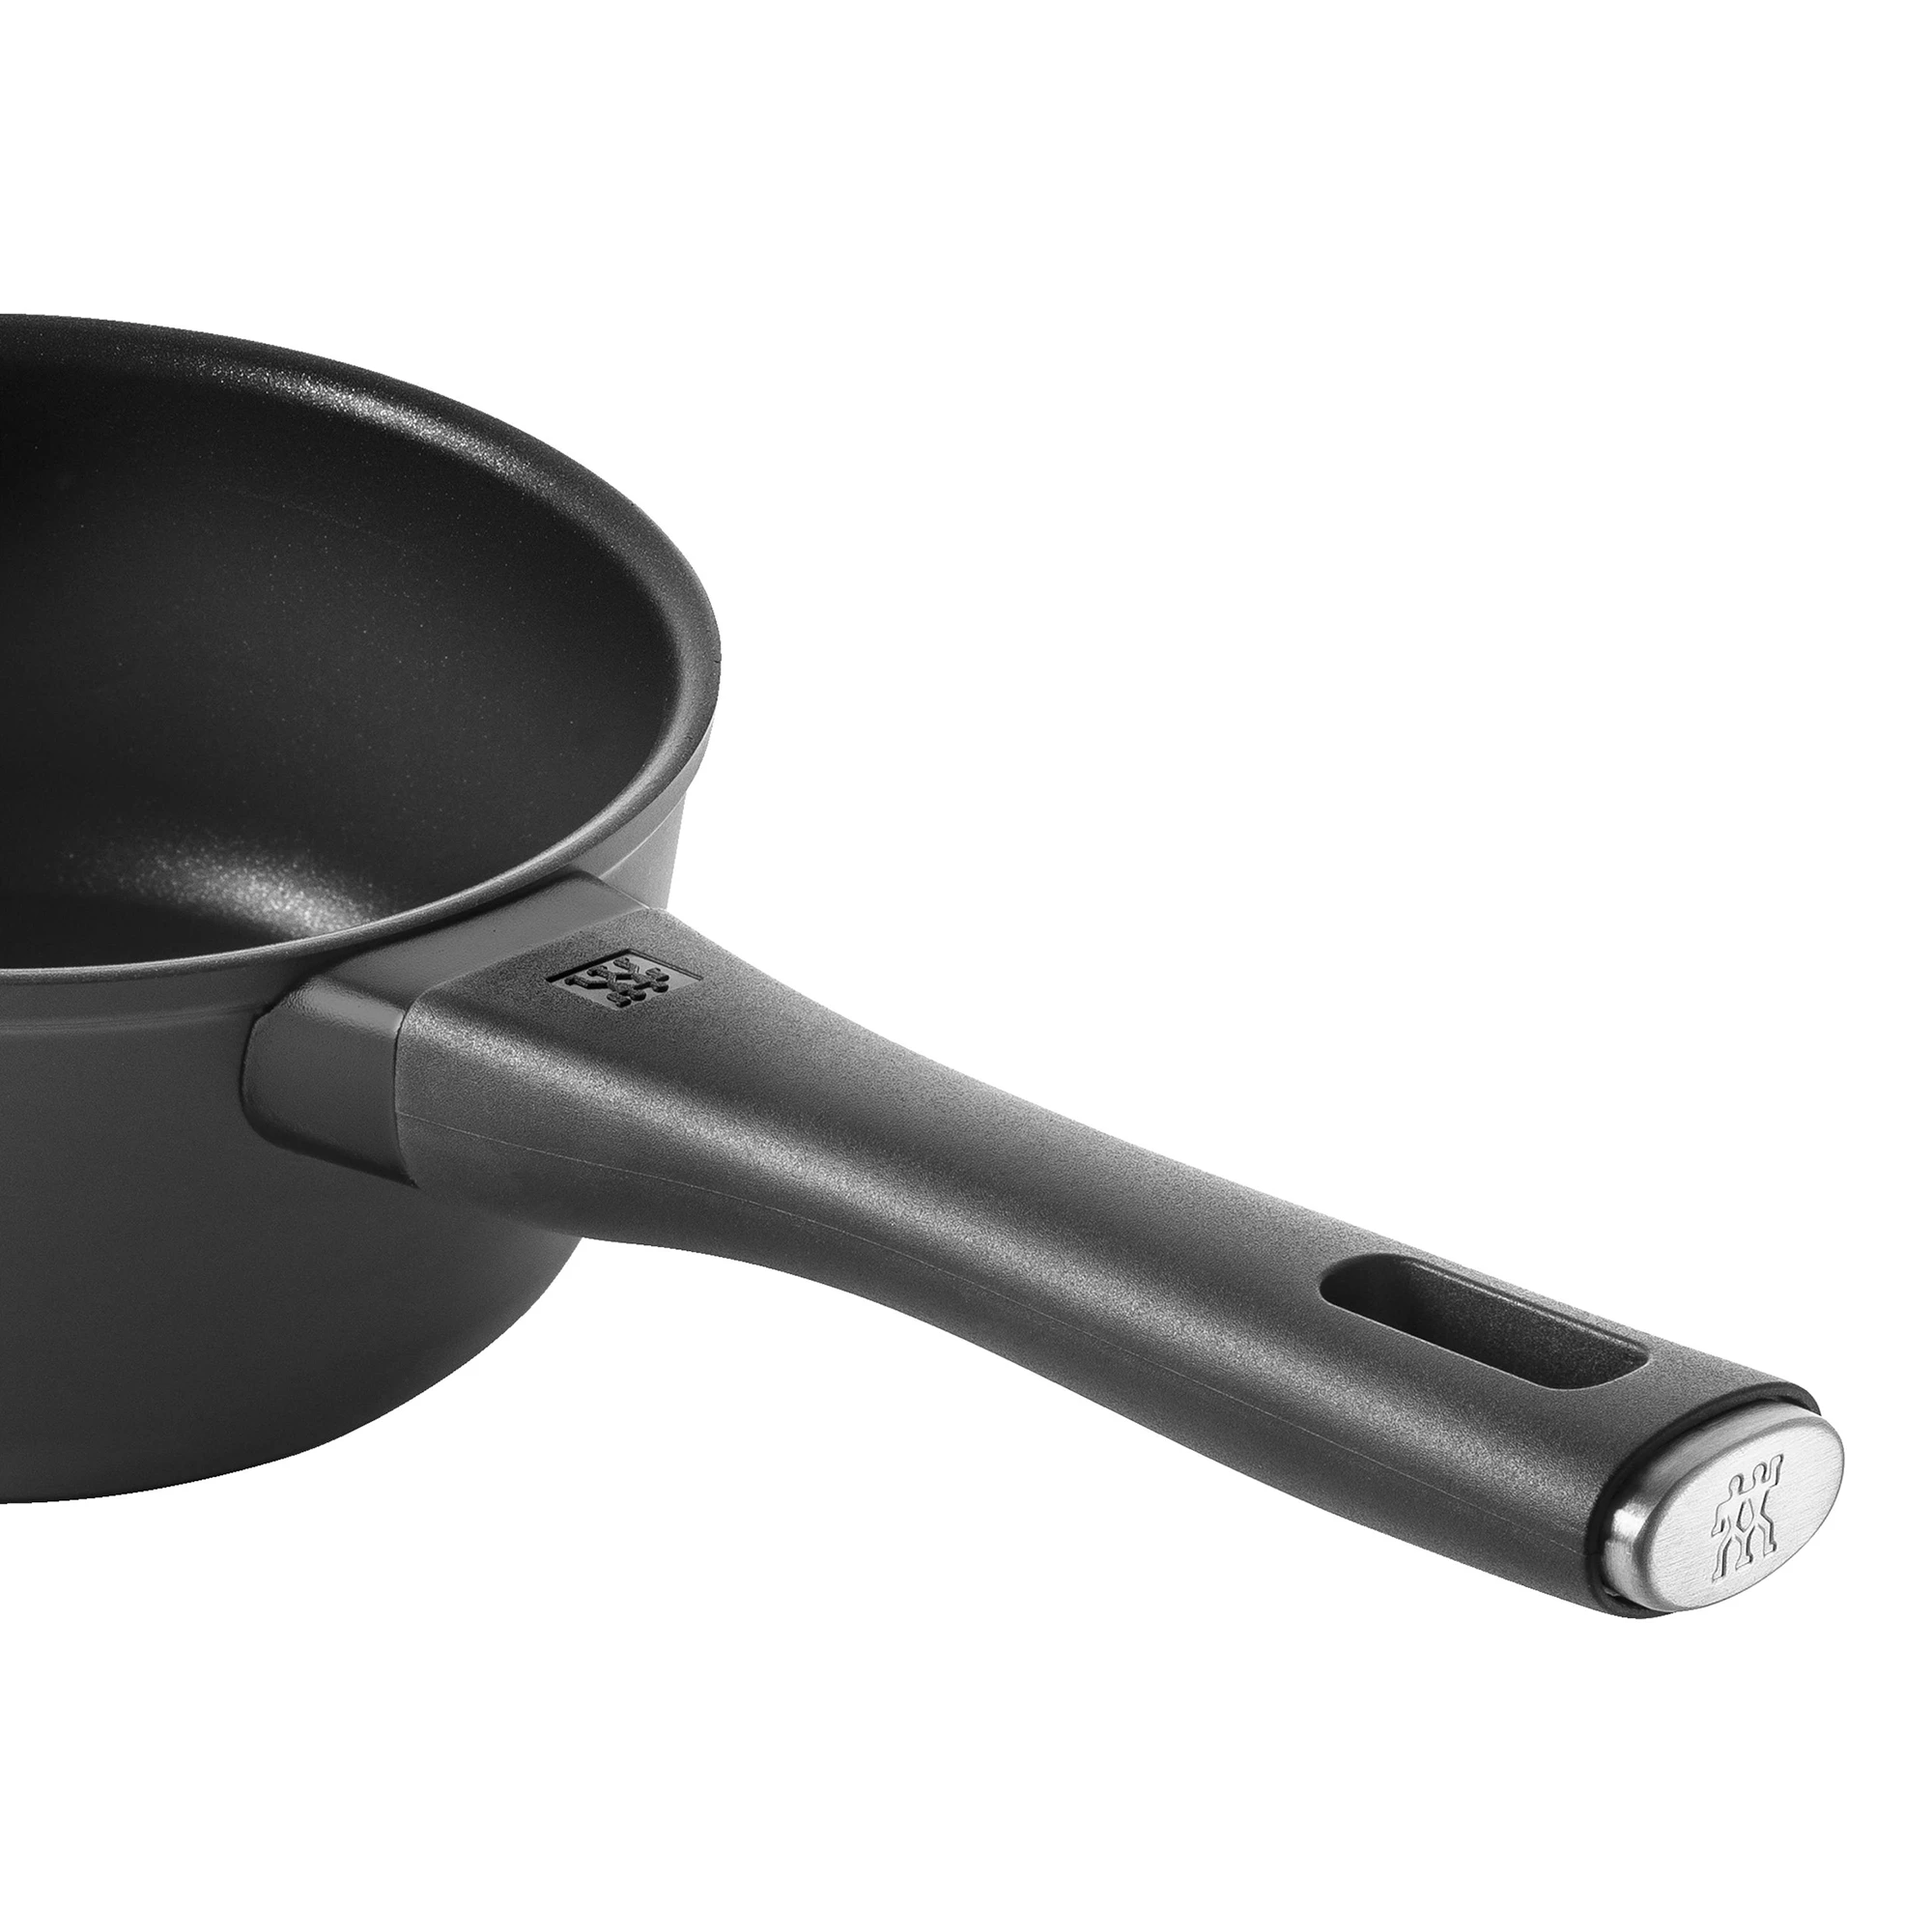  ZWILLING Madura Plus Forged Nonstick 2-pc Fry Pan Set